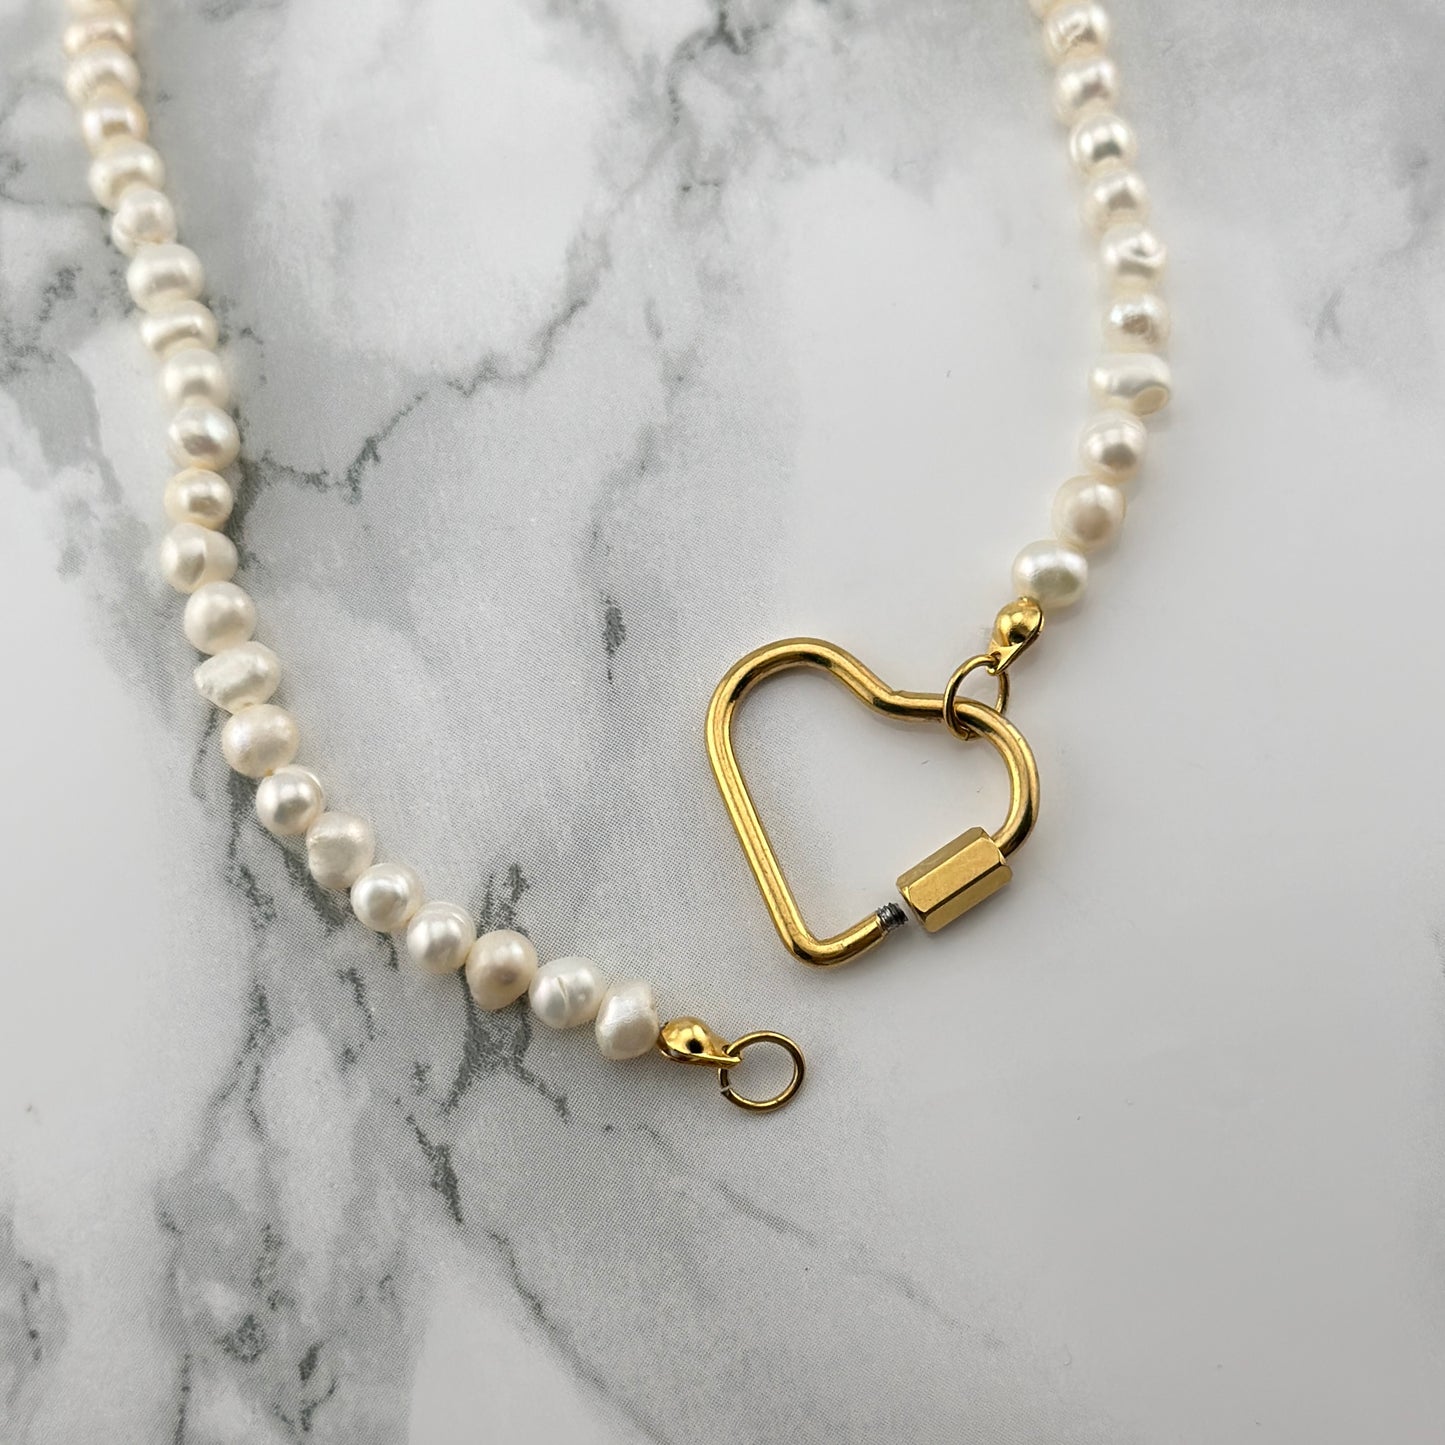 Golden Heart Pearl necklace